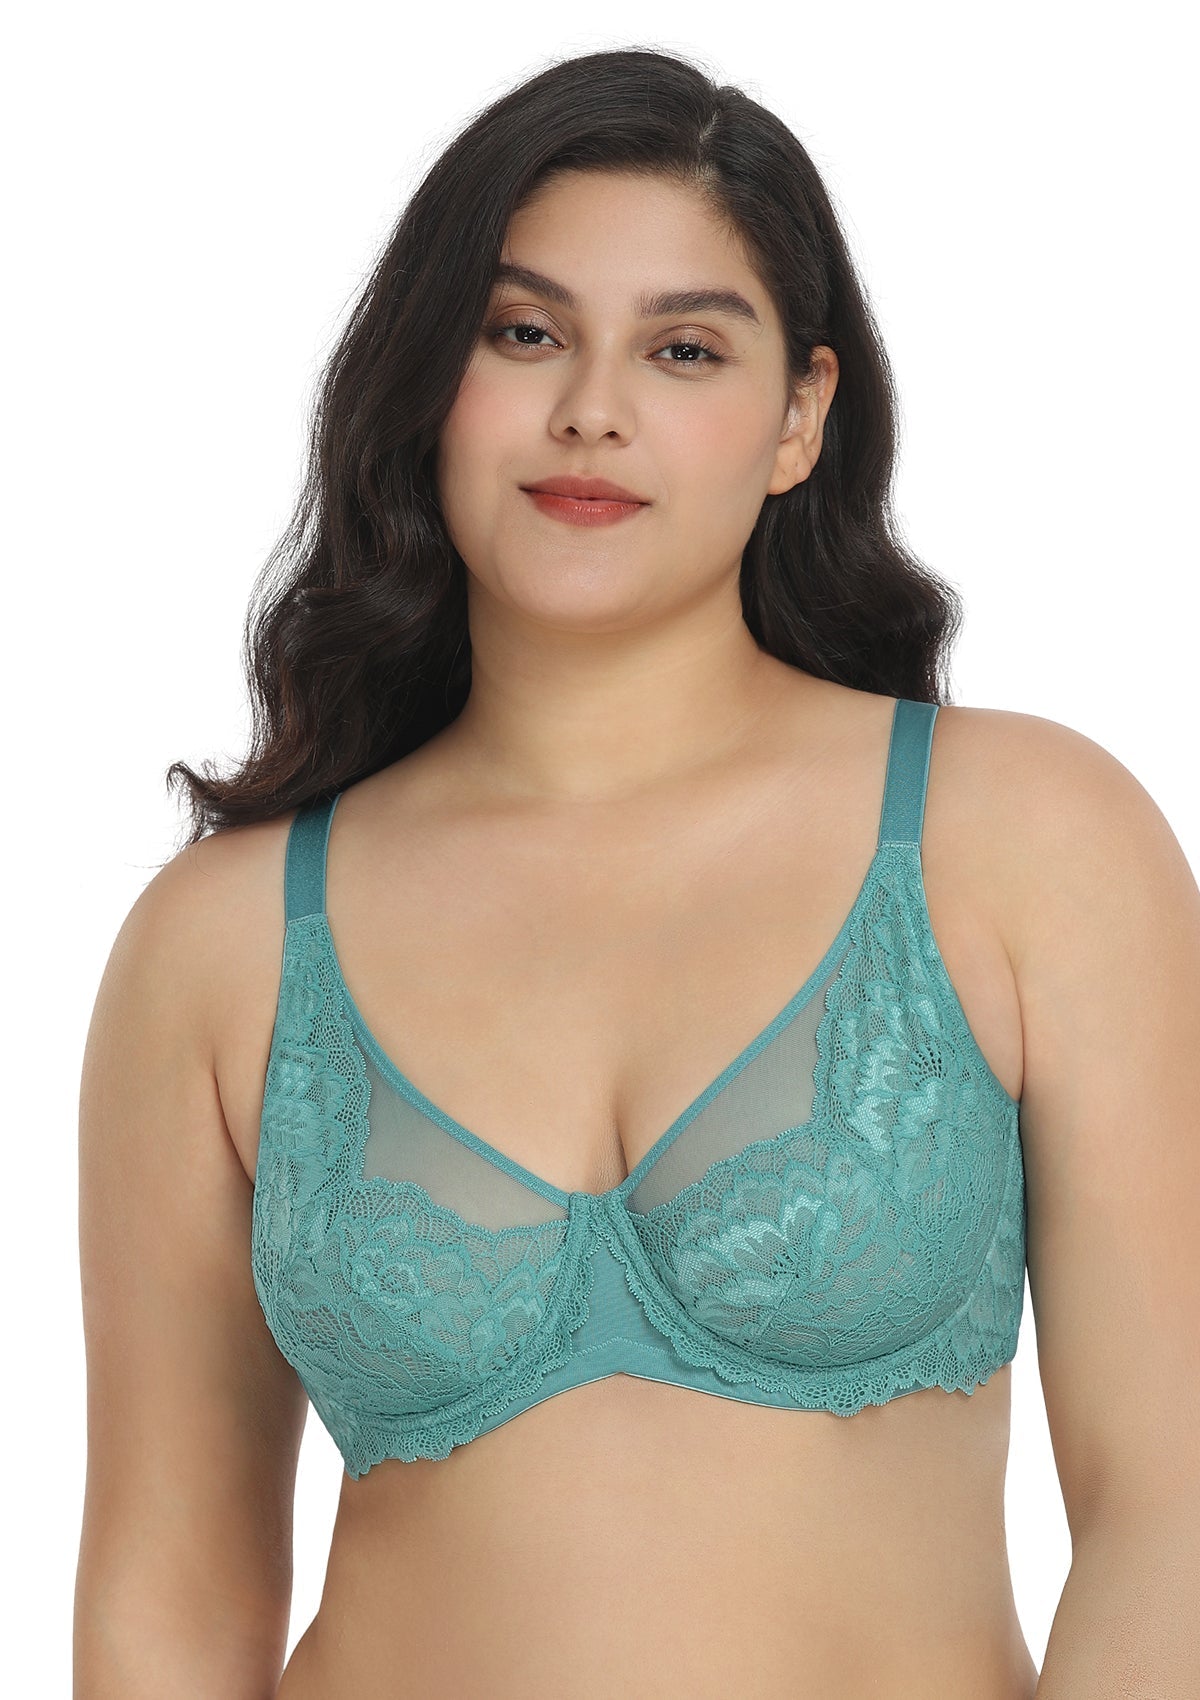 HSIA Paeonia Lace Full Coverage Underwire Non-Padded Uplifting Bra - Dark Blue / 40 / D